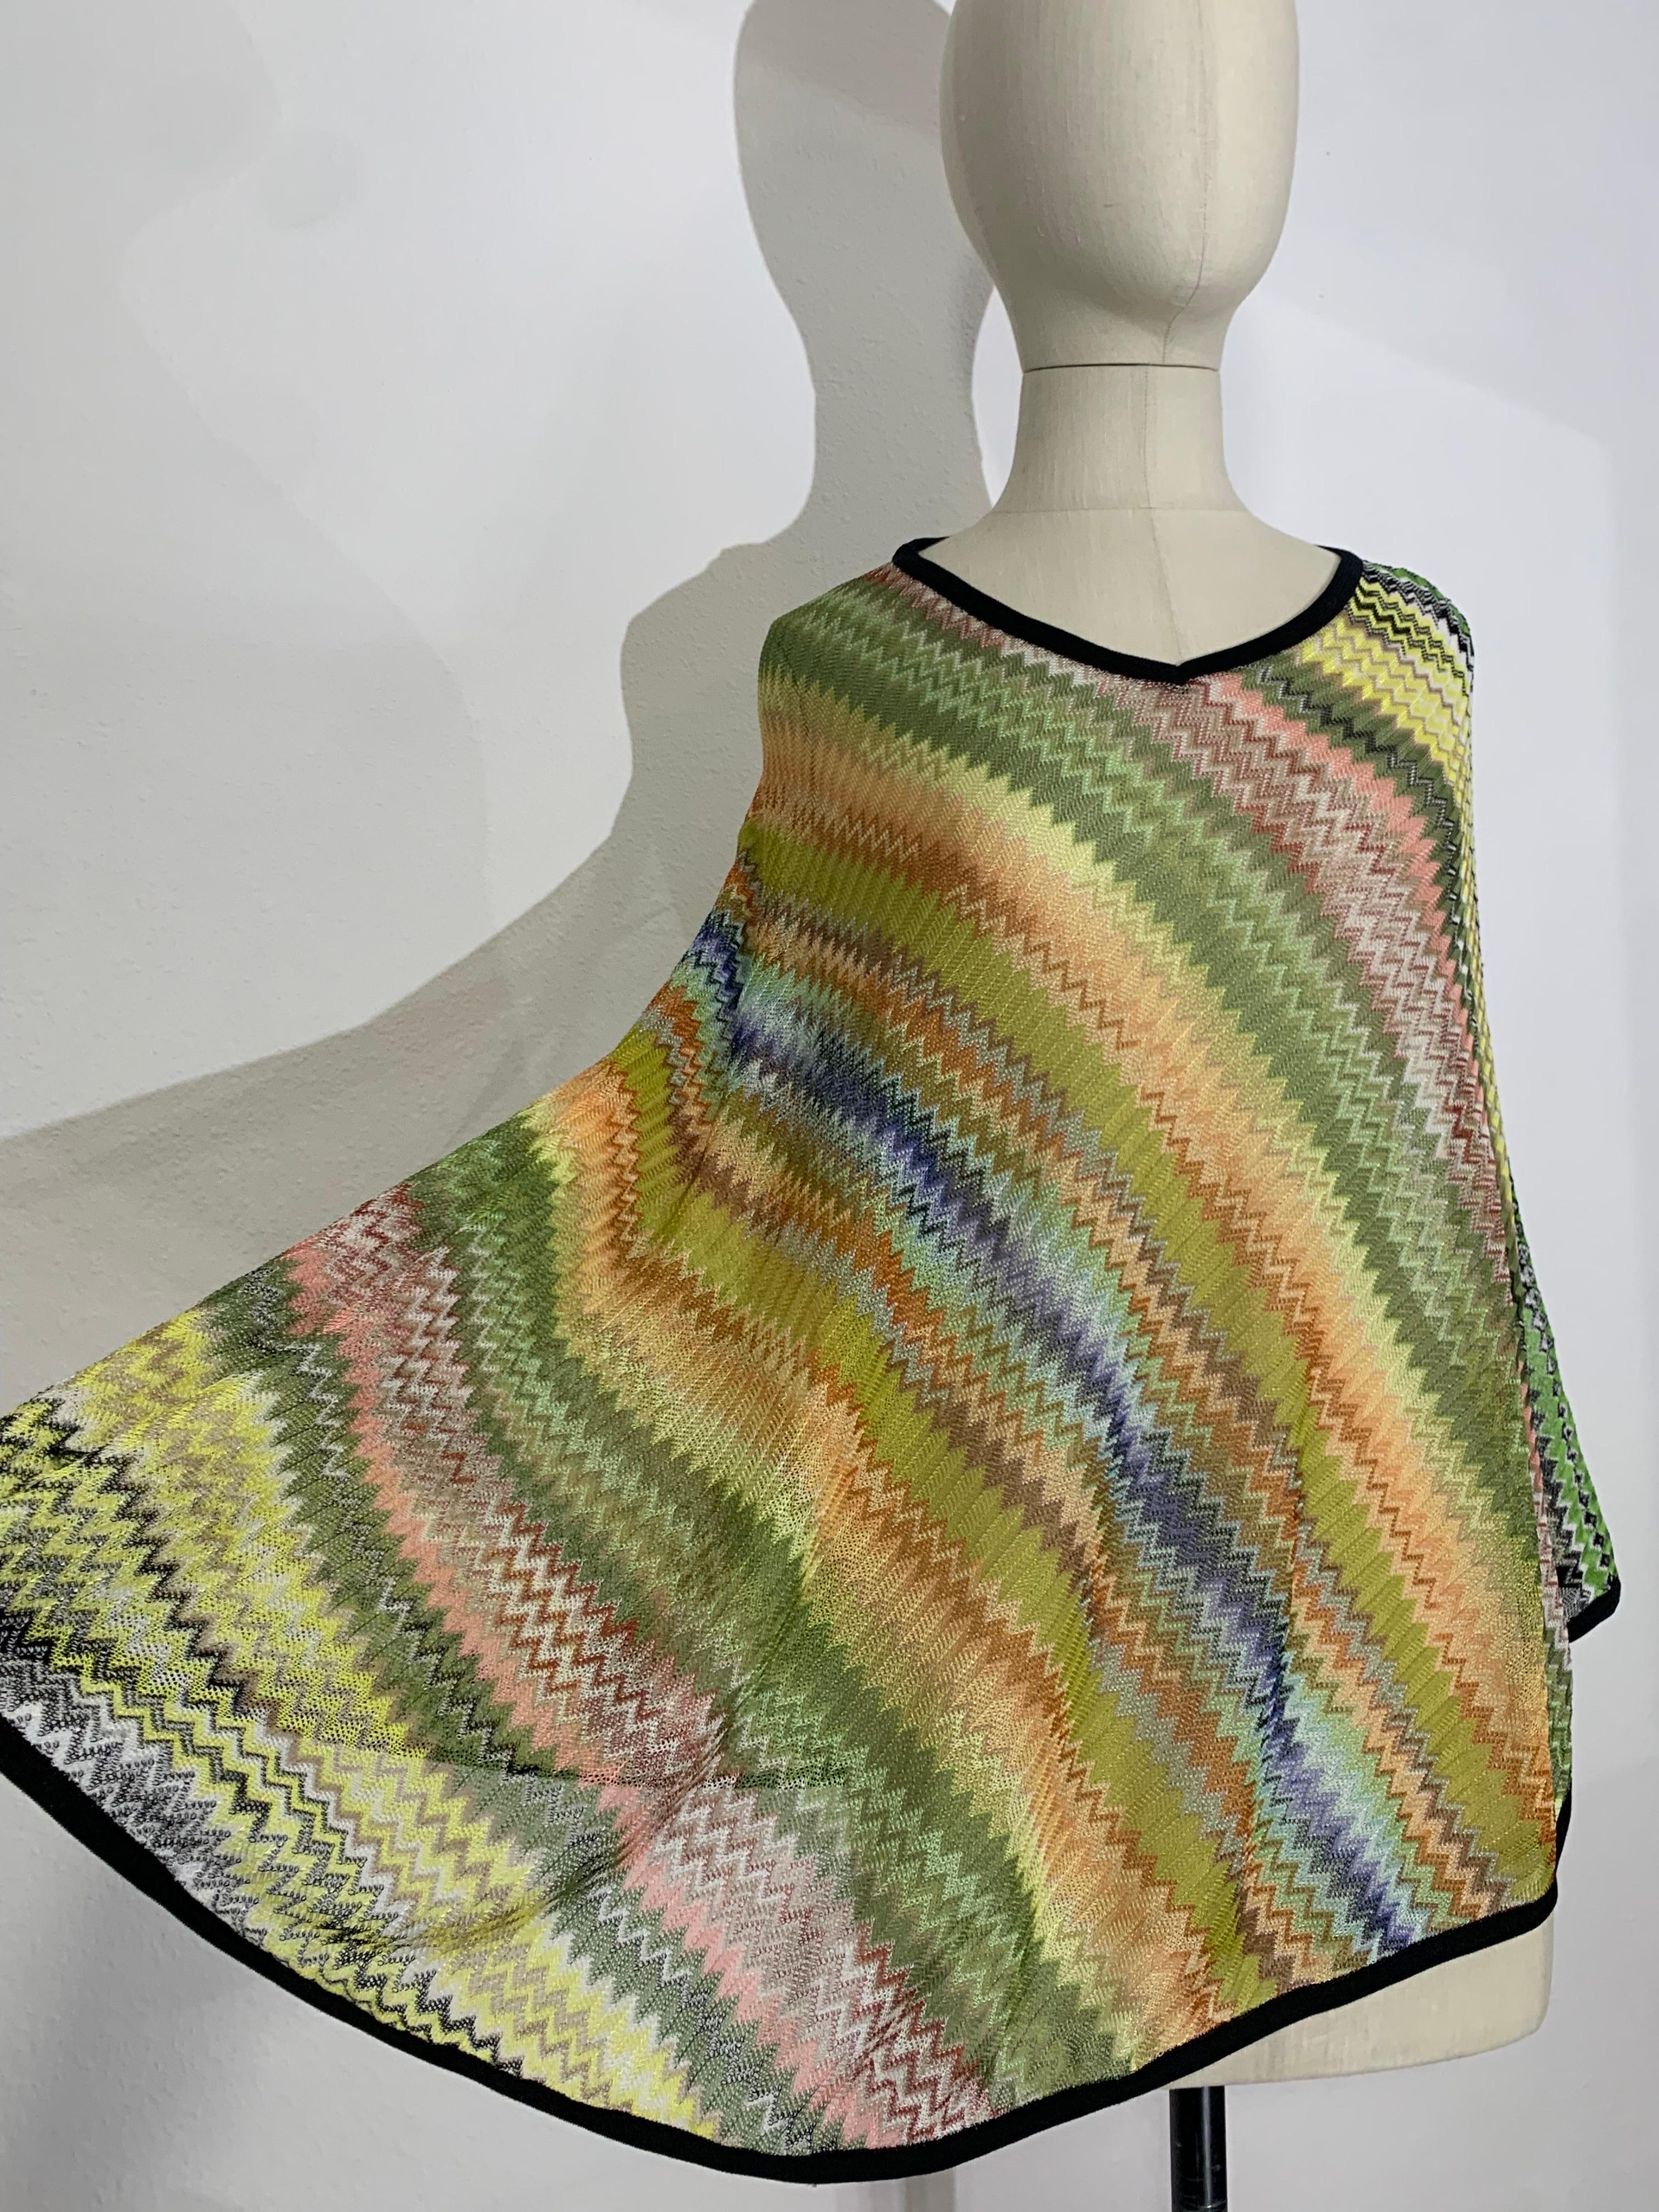 Missoni Spring/Summer Rayon & Cotton Knit Cover-Up in Classic Missoni Zig-Zag:  This classic Missoni lightweight swimsuit cover-up is asymmetrical in shape and the palette is in chartreuse, mint, pink and yellows with black banding trim. Size Small. 